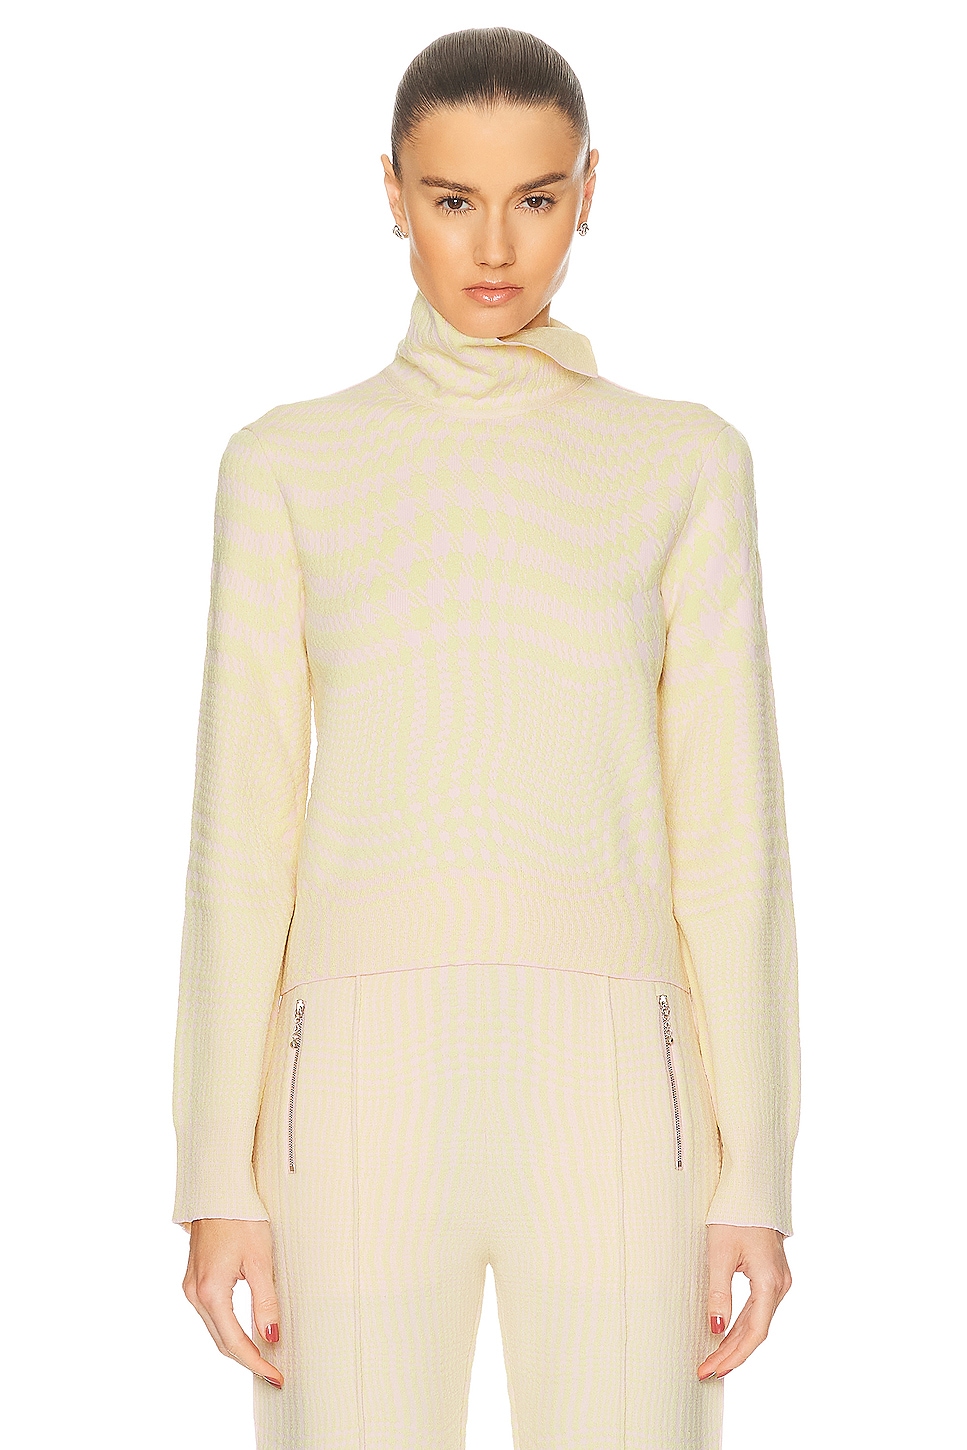 Image 1 of Burberry Turtleneck Sweater in Cameo IP Pattern